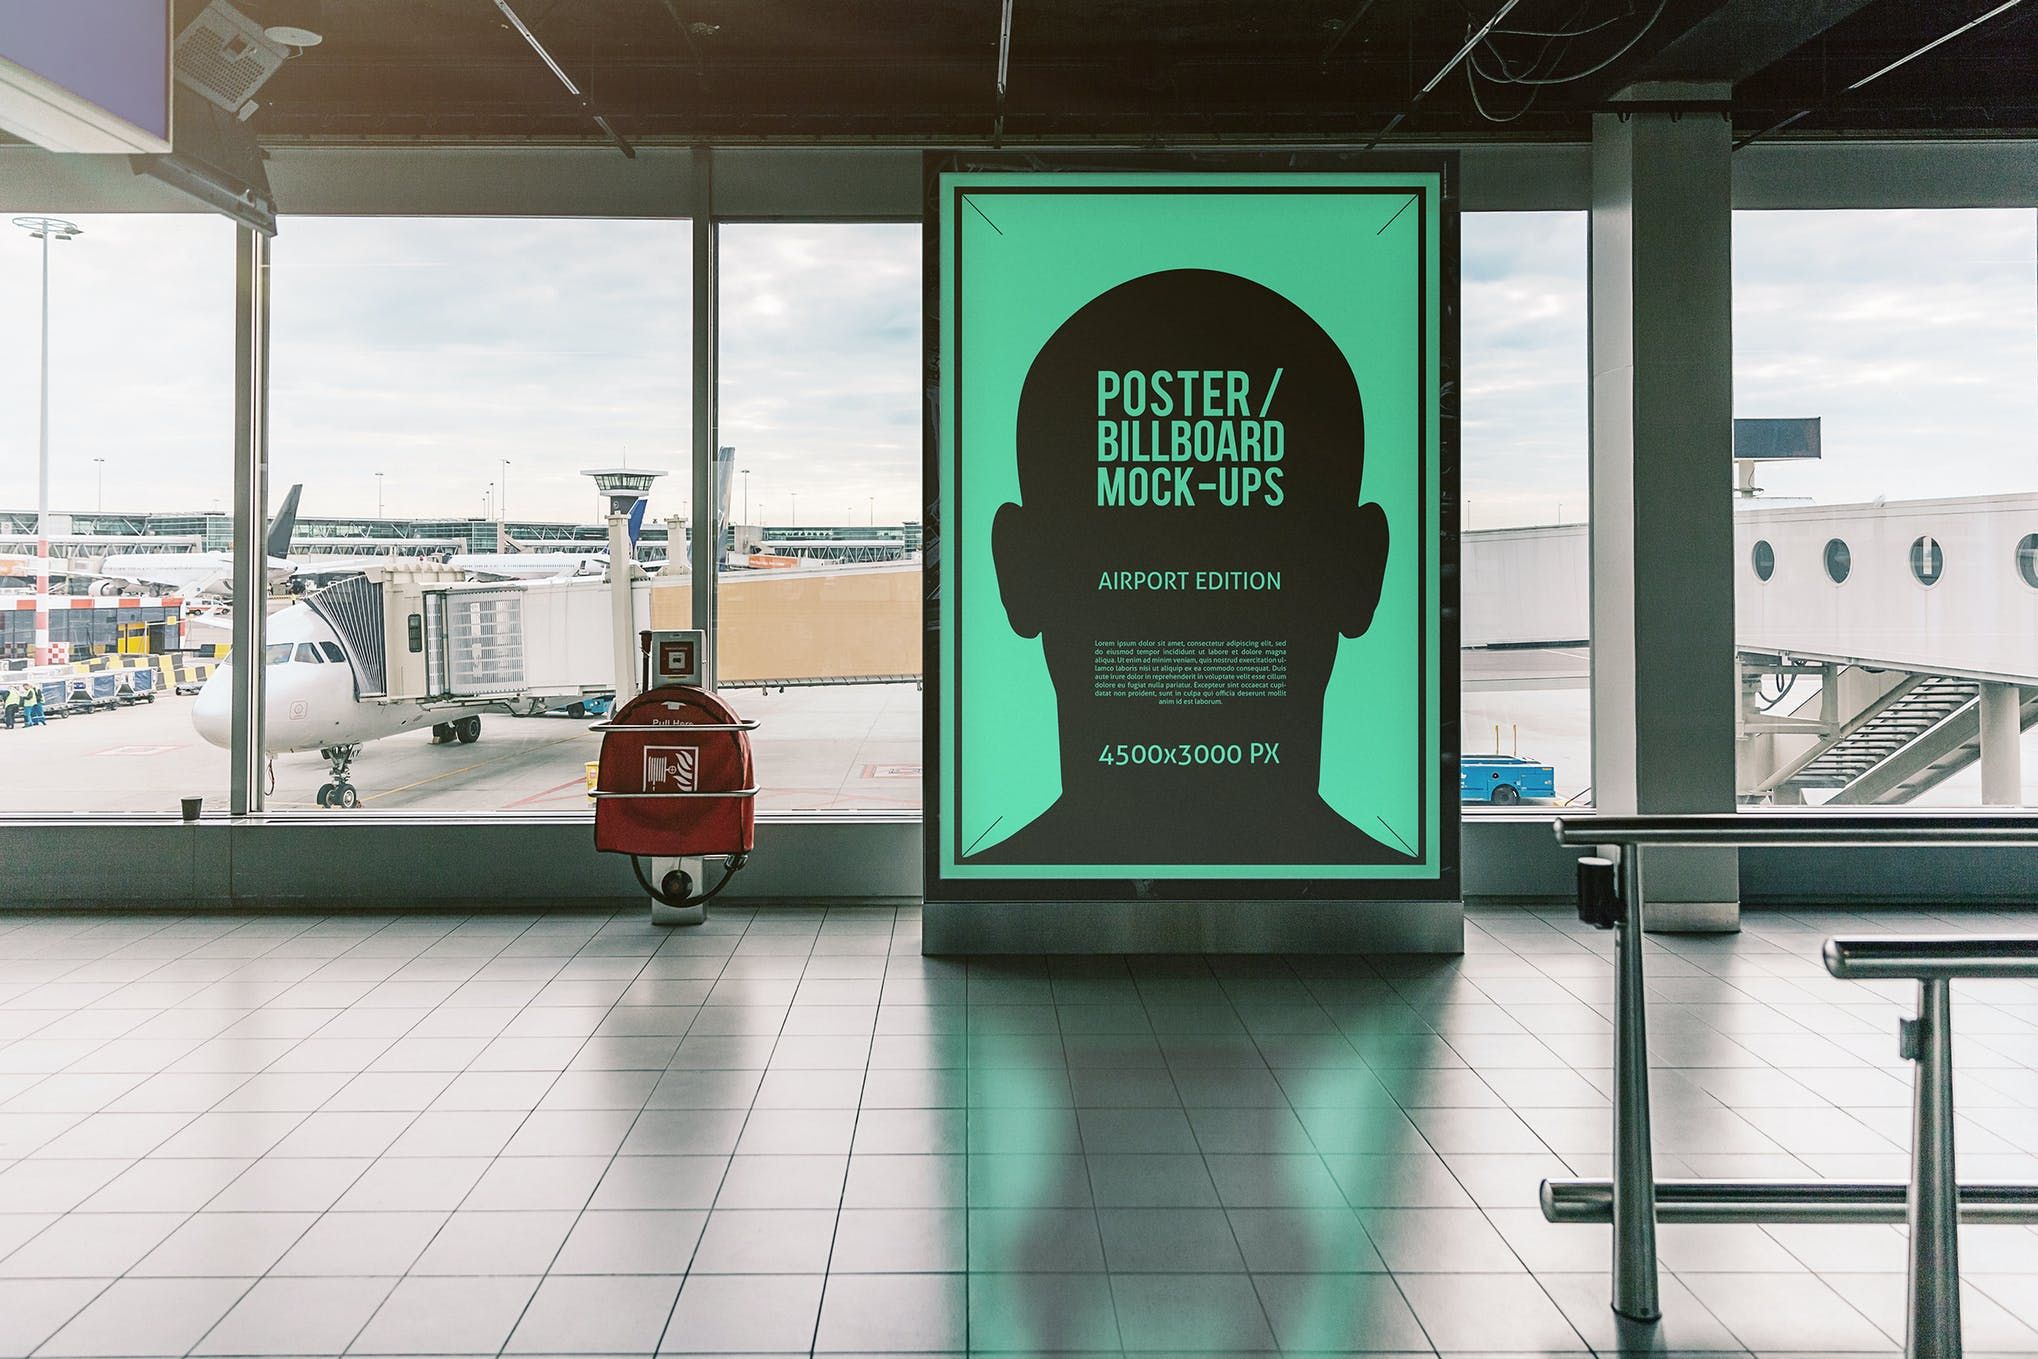 4 Ways to Achieve Your Marketing Goals With Airport Advertising